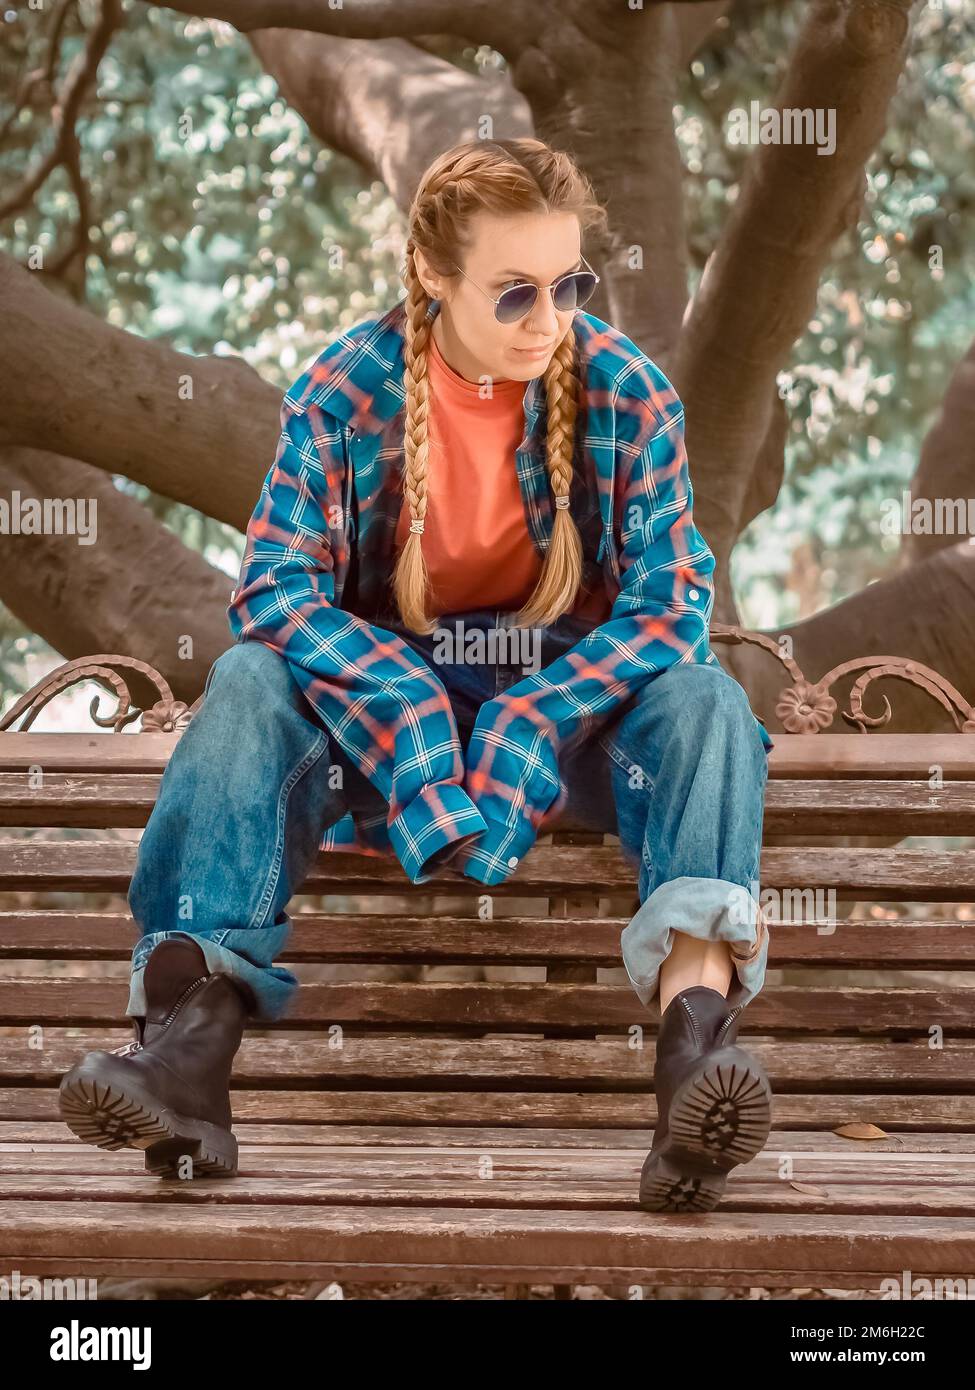 A girl with pigtails in a plaid shirt with excessively long sleeves, oversize jeans and rough shoes sits on a park bench. Stock Photo